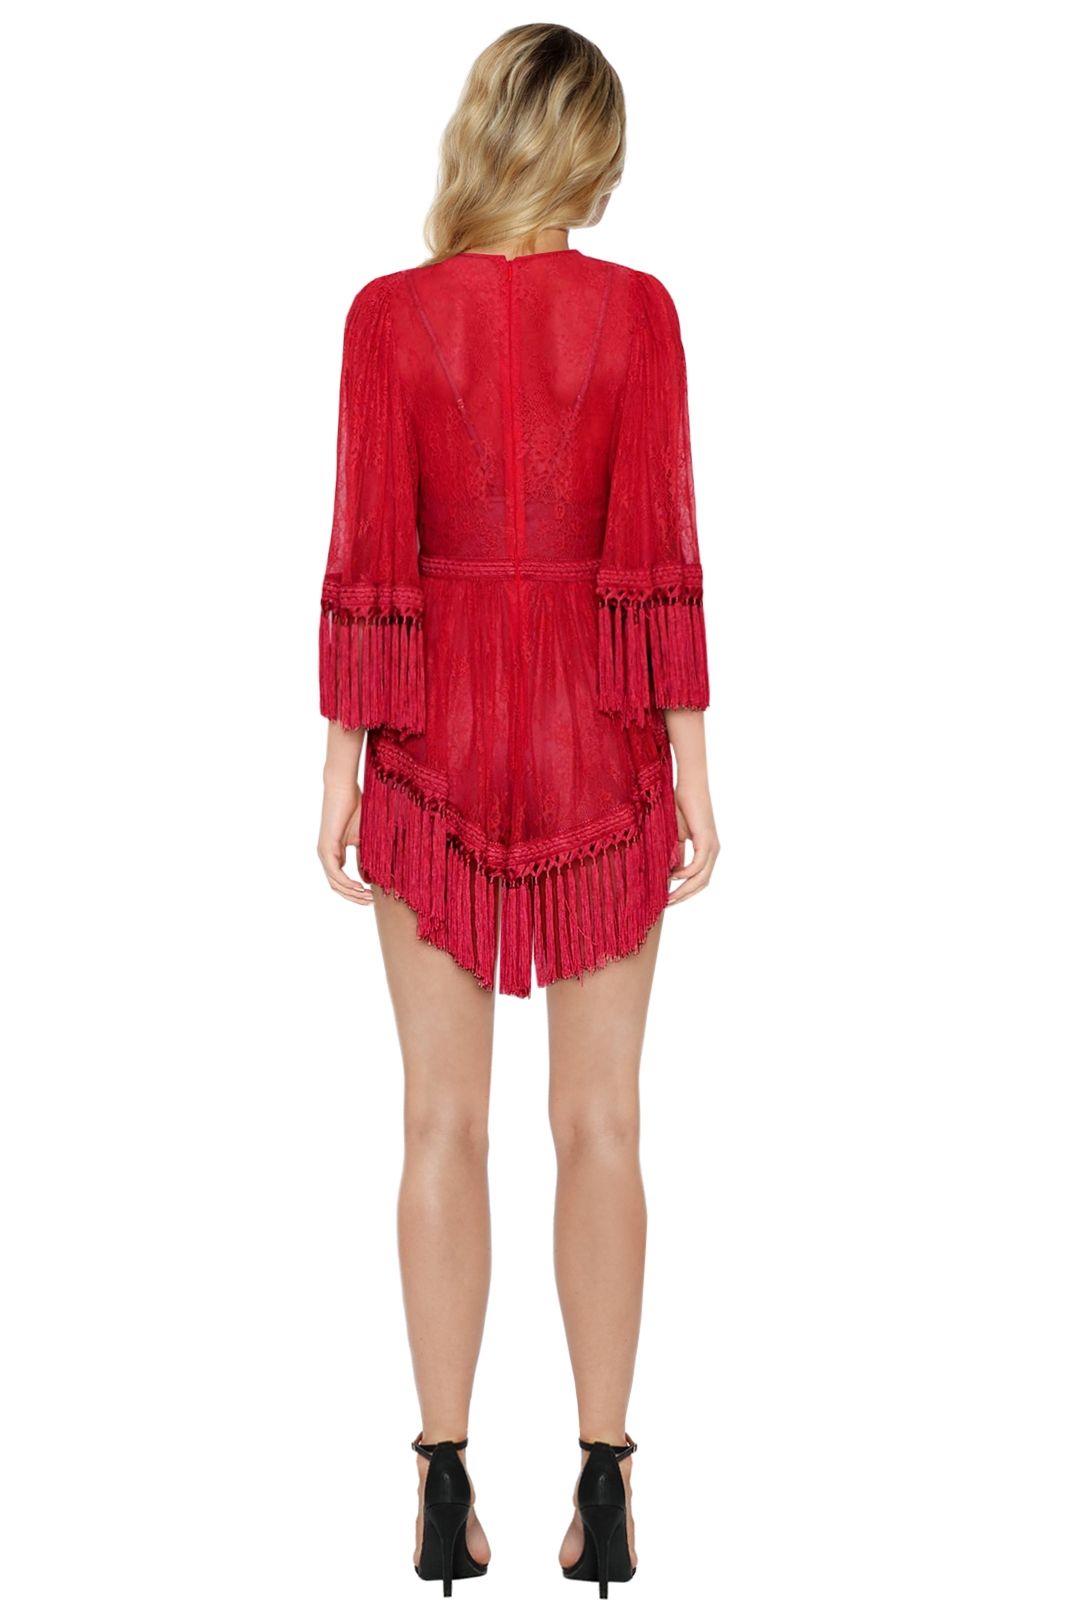 Alice McCall - Are You Ready Girl Mini Dress - Red - Back